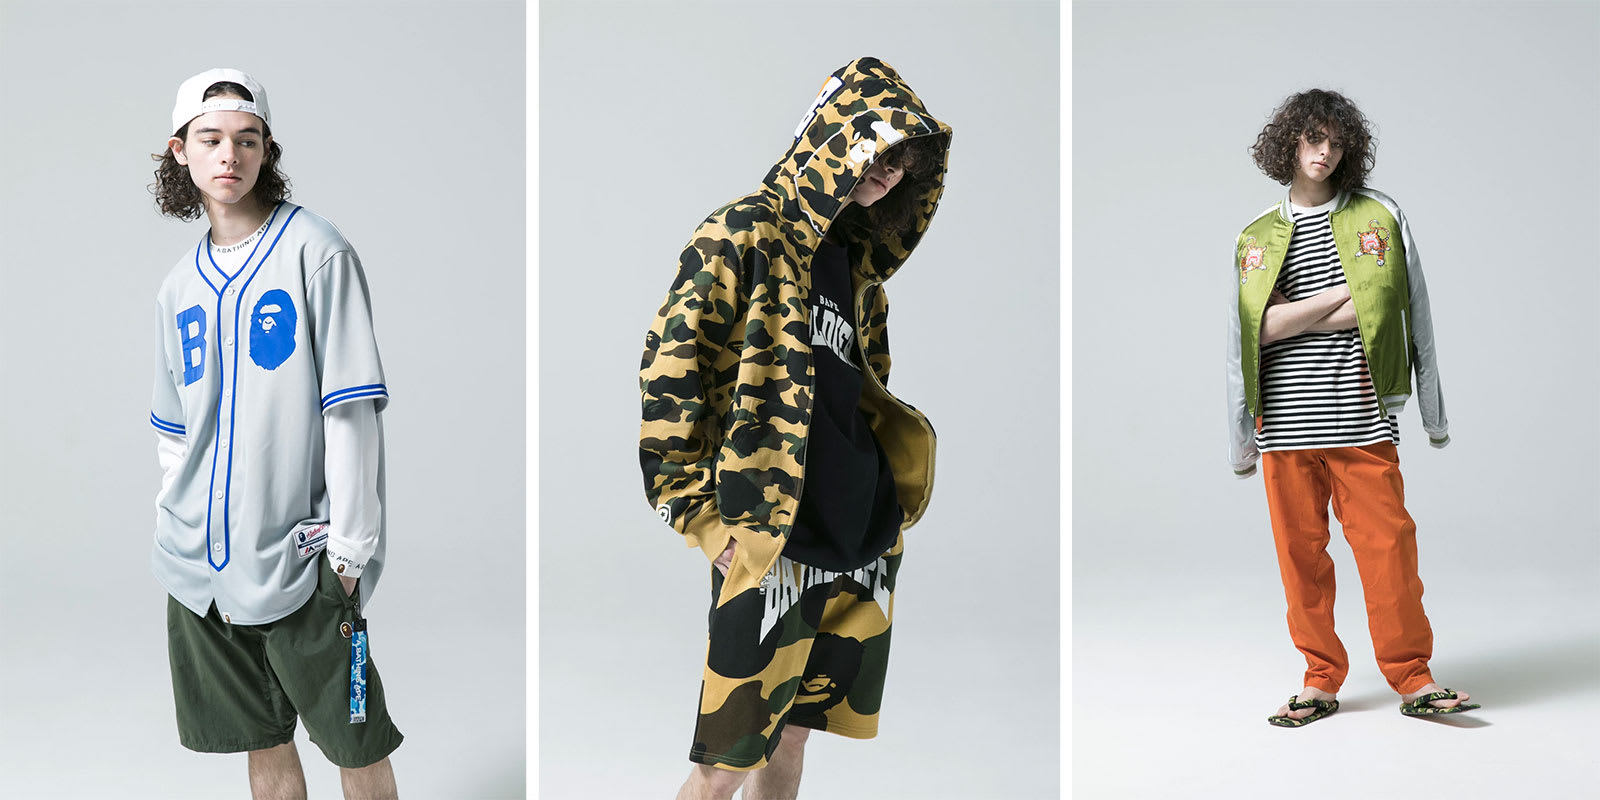 Some clothes from Bathing Ape SS18 Men's collection (Credit: Bathing Ape)